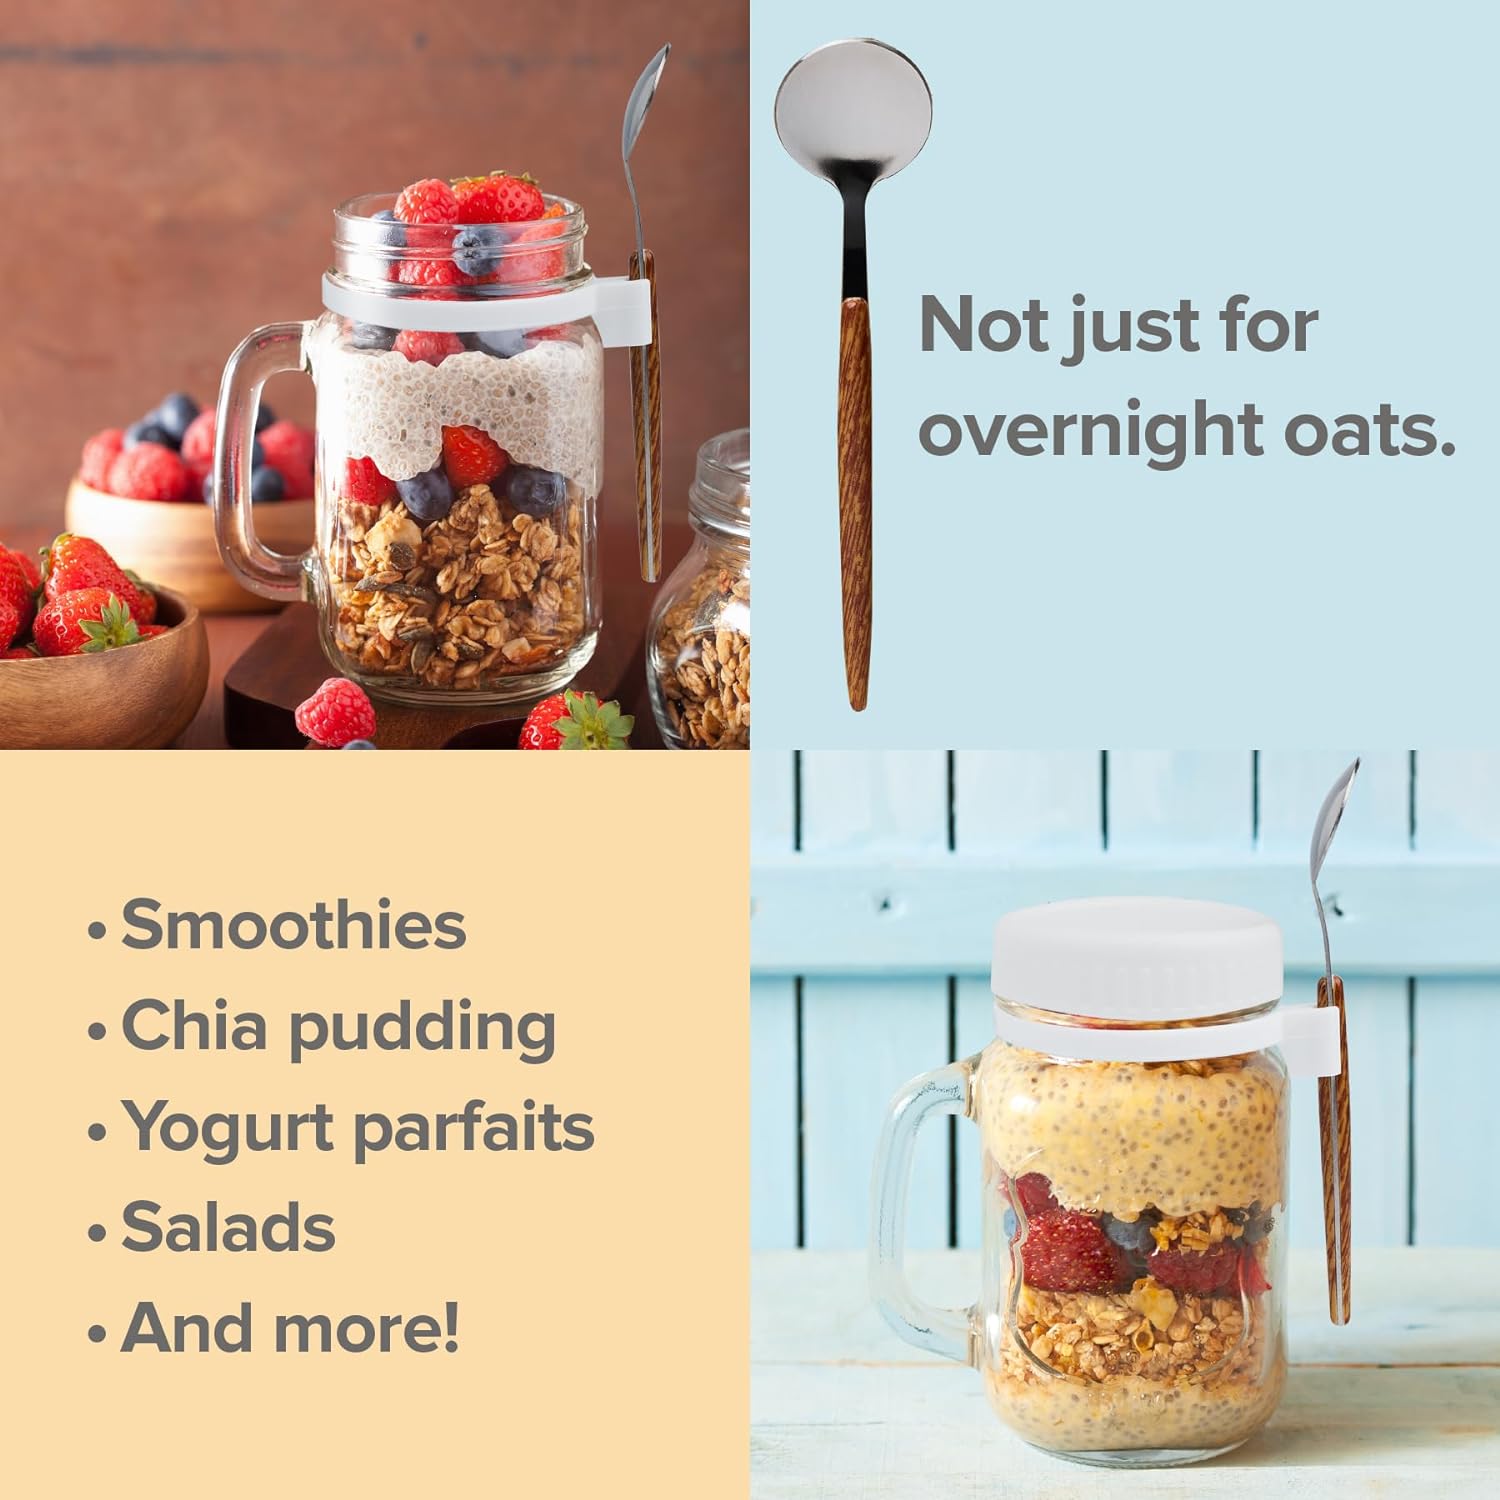 a collage of a jar of oats with berries with text: 'Not just for overnight oats. Smoothies Chia pudding Yogurt parfaits Salads And more!'